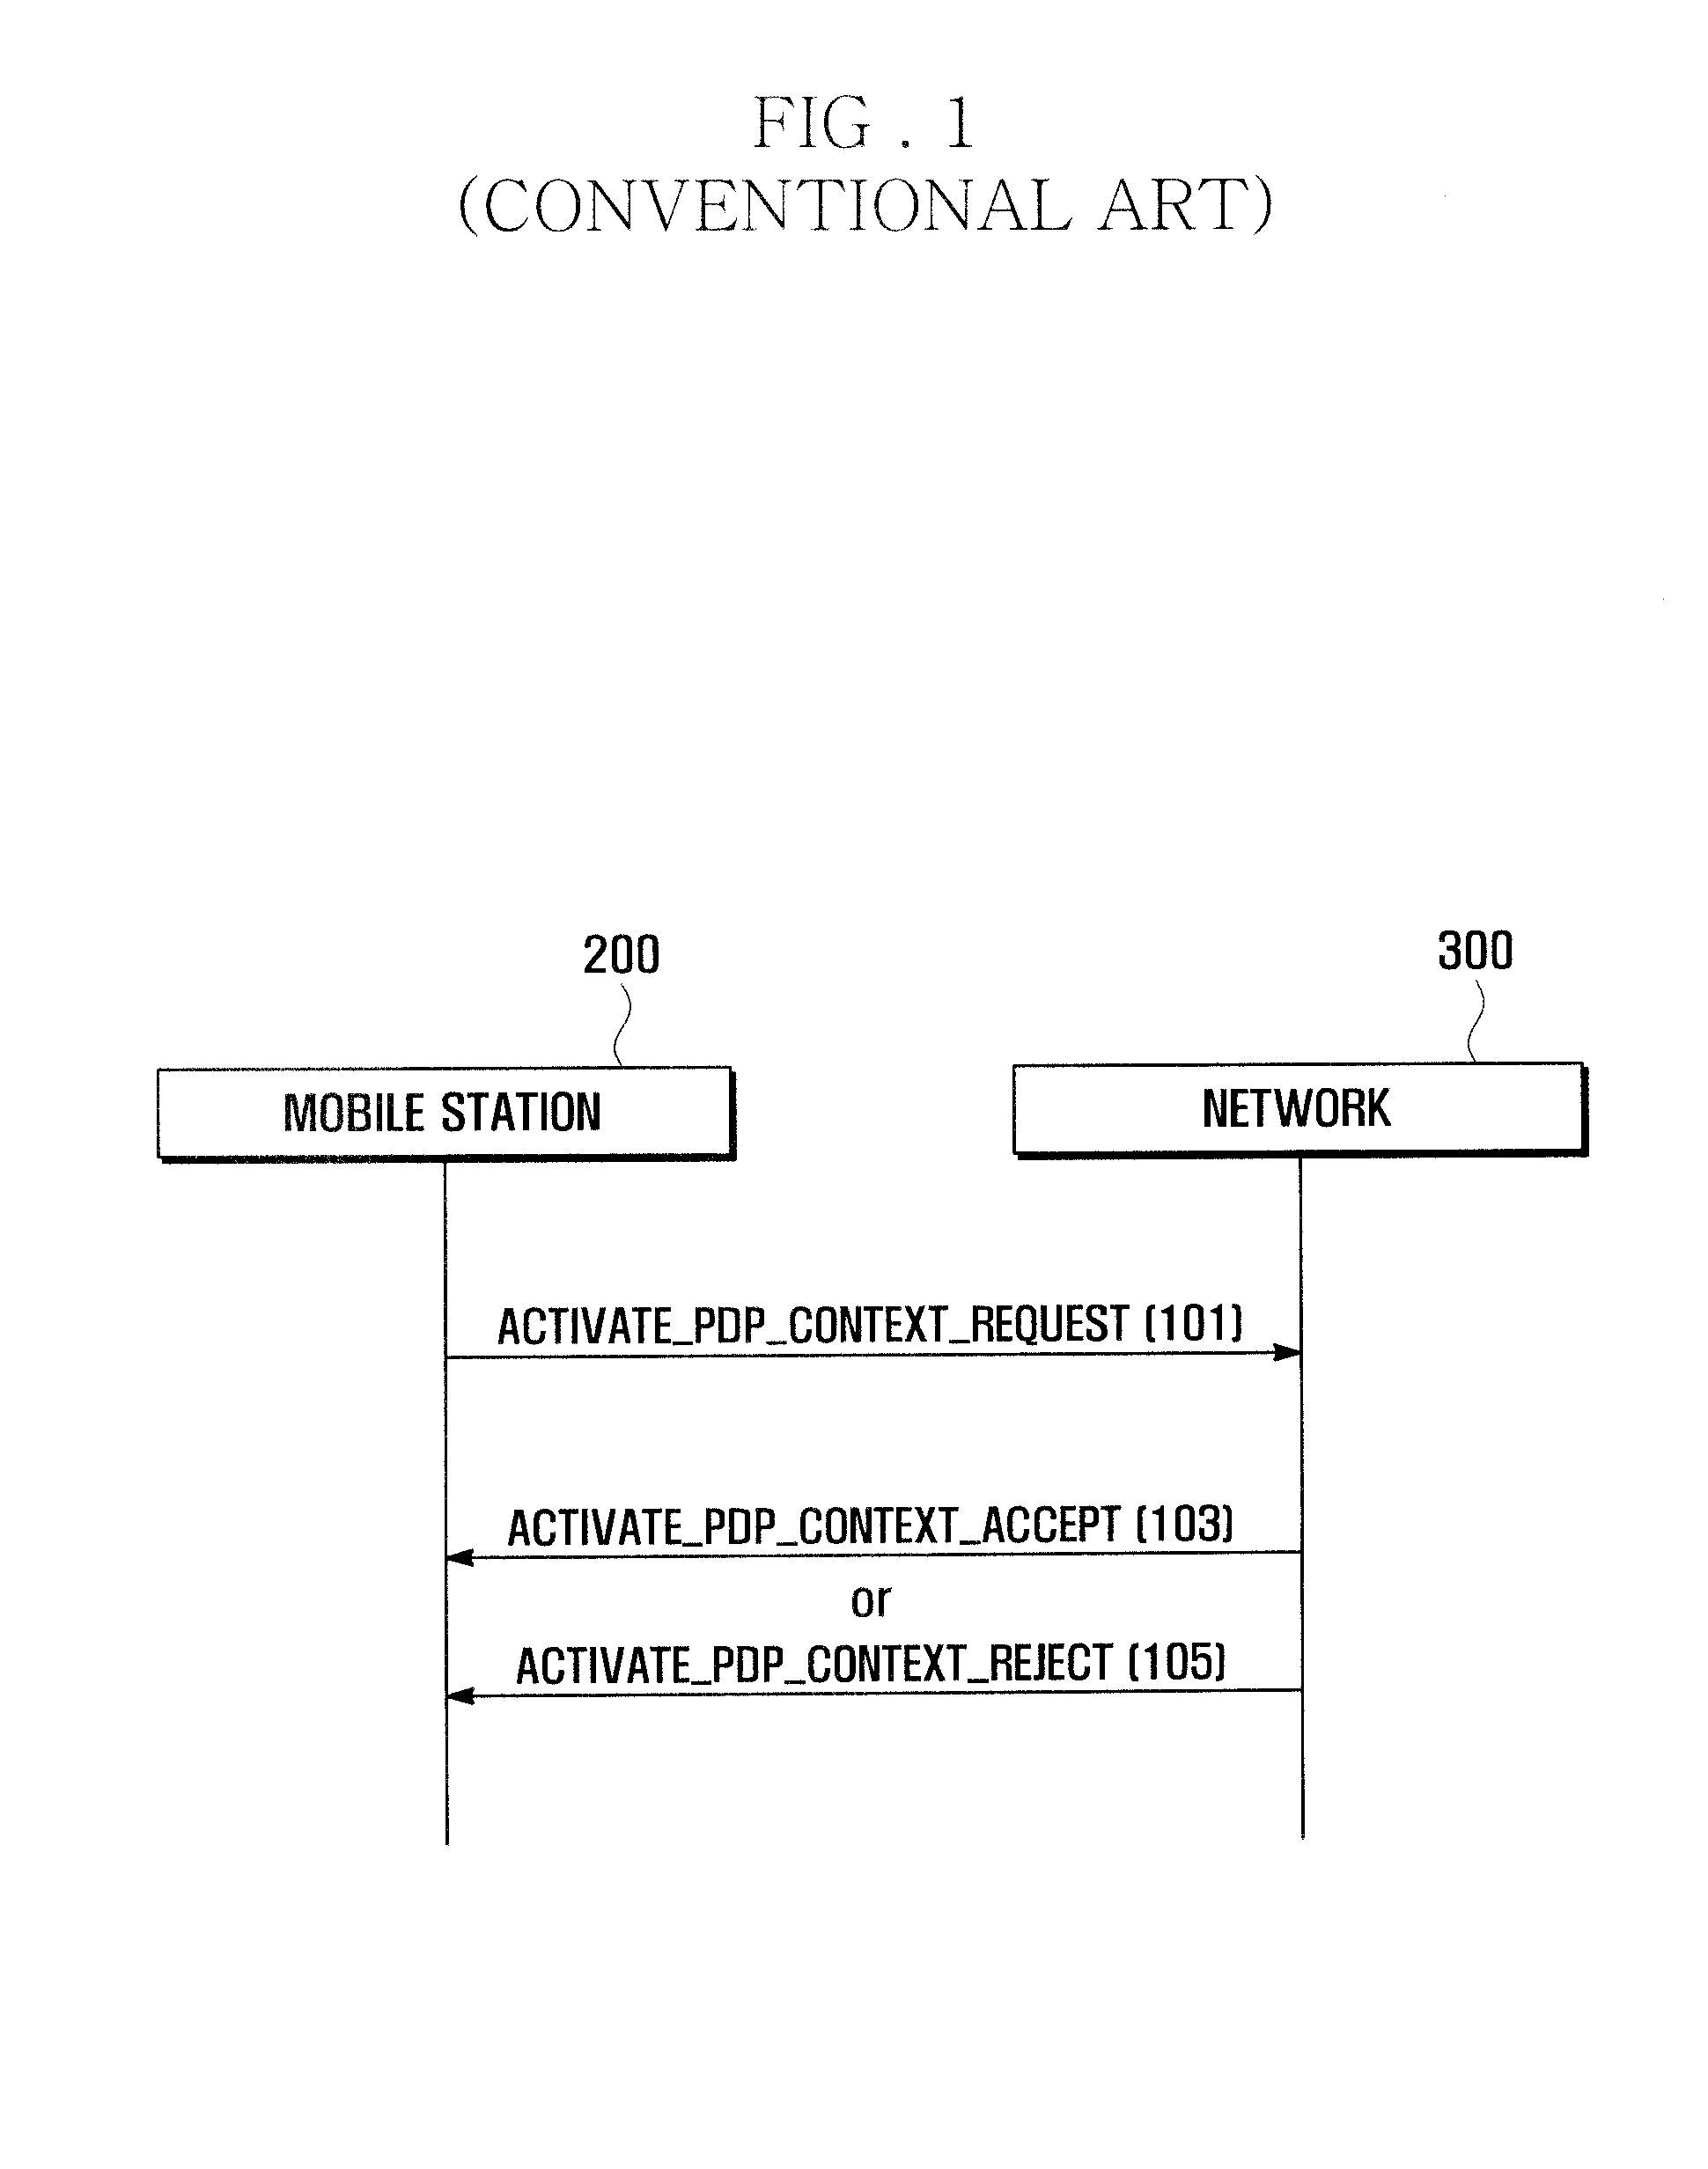 Packet data protocol context management method for a mobile station